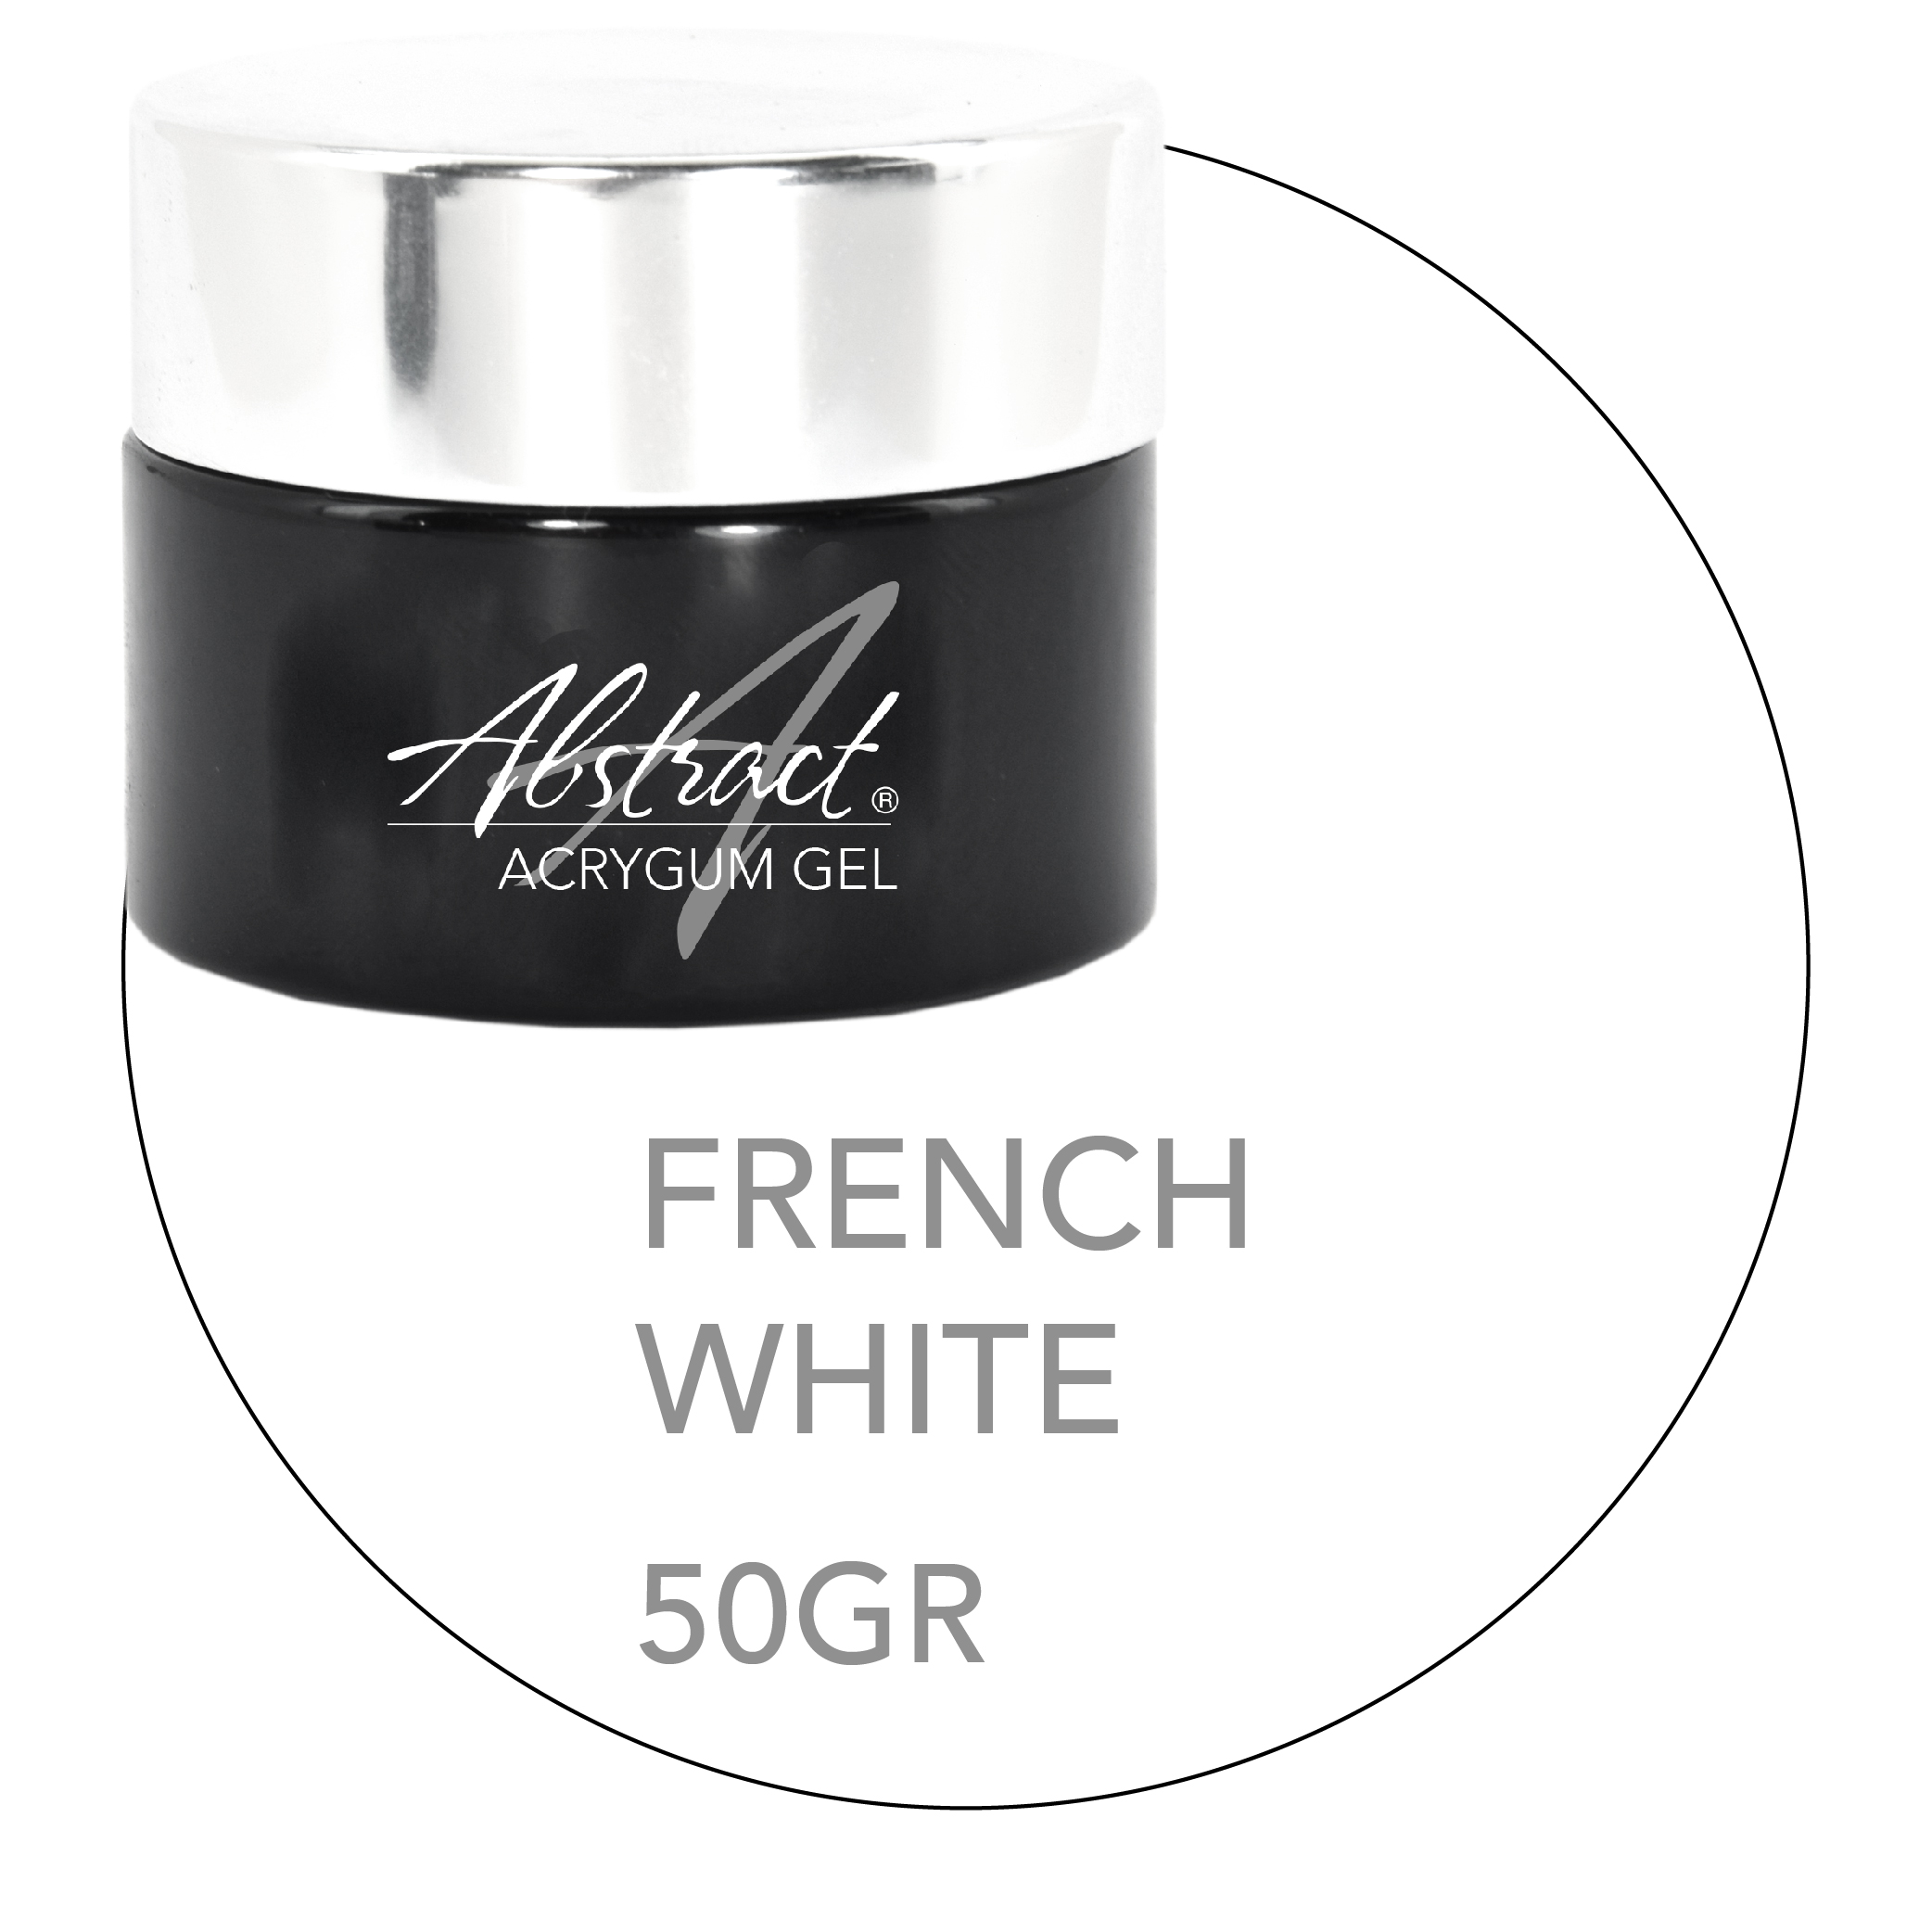 AcryGum Gel FRENCH WHITE 50gr, Abstract | 136296